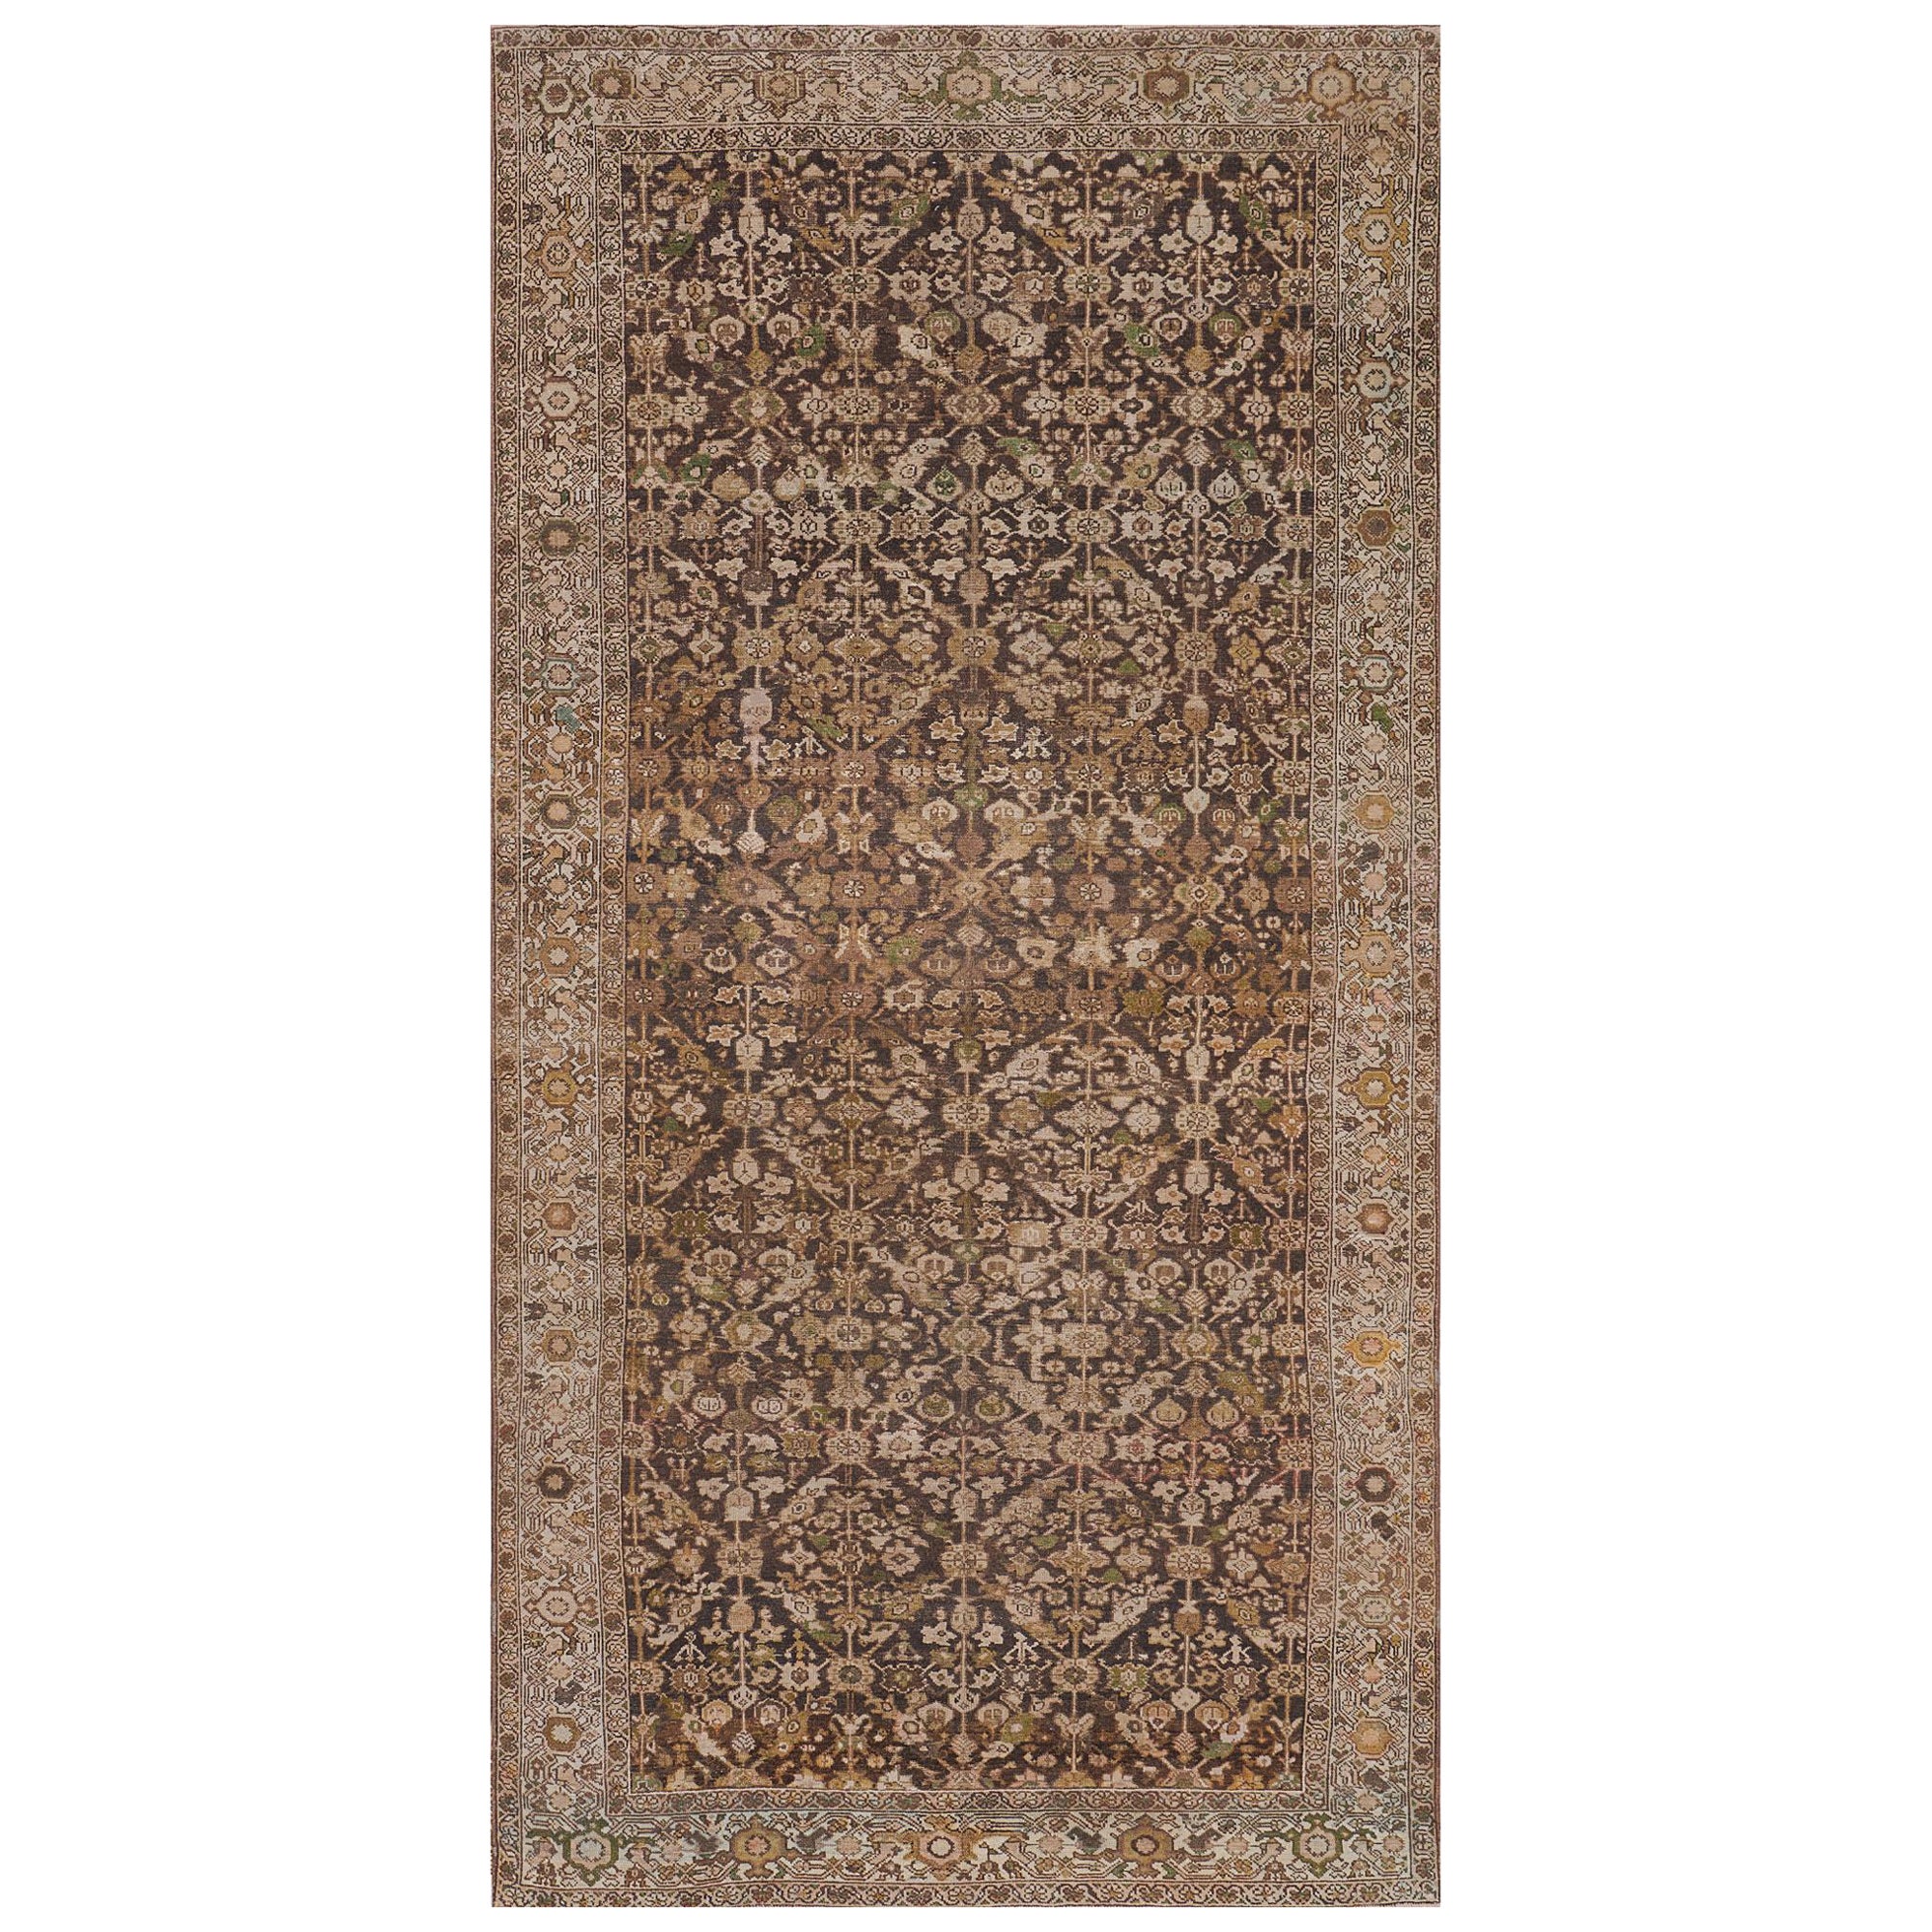 Antique Hand-Knotted Wool Persian Malayer Rug